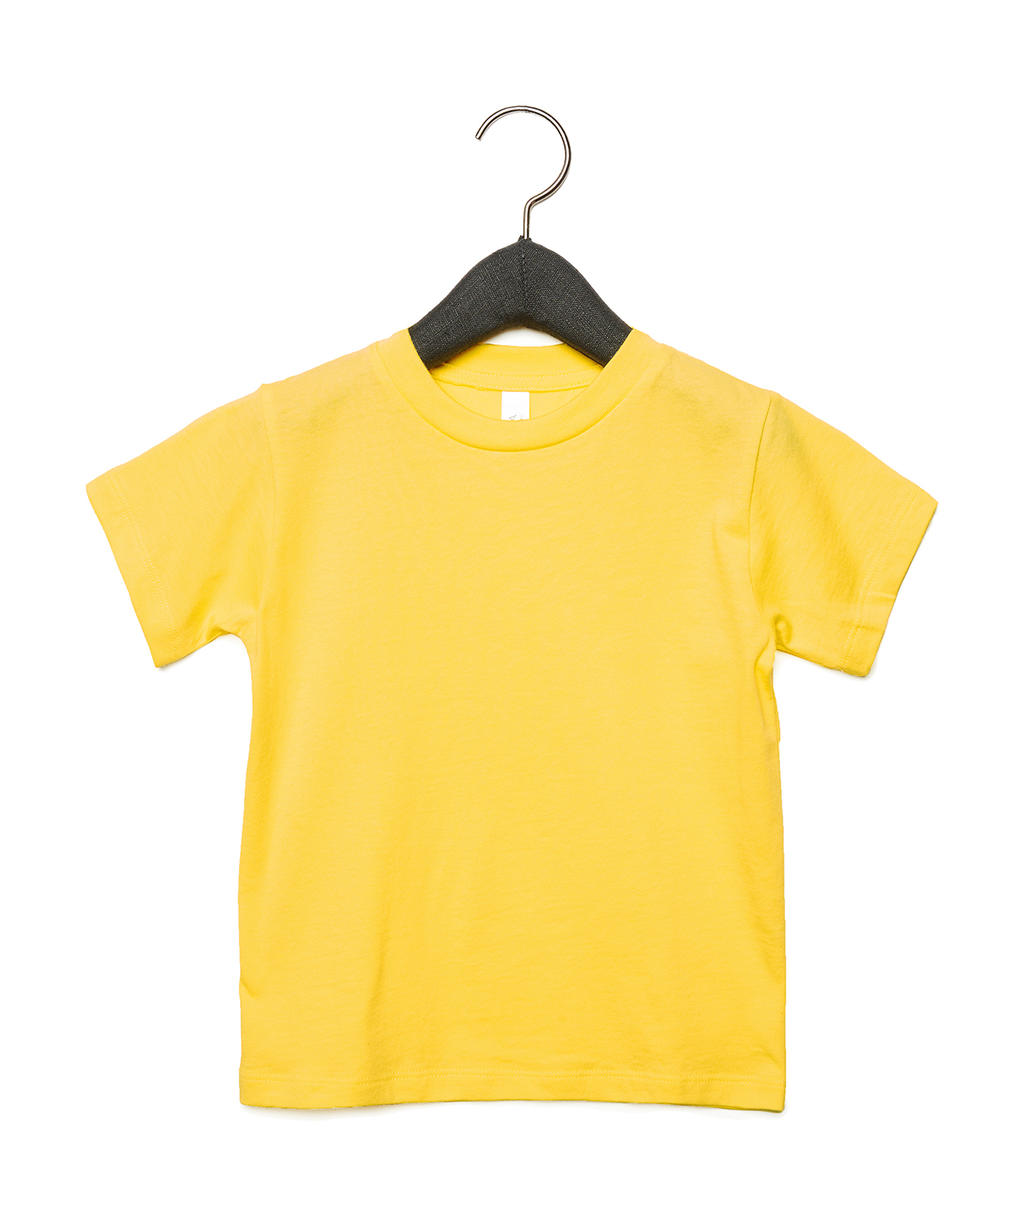  Toddler Jersey Short Sleeve Tee in Farbe Yellow